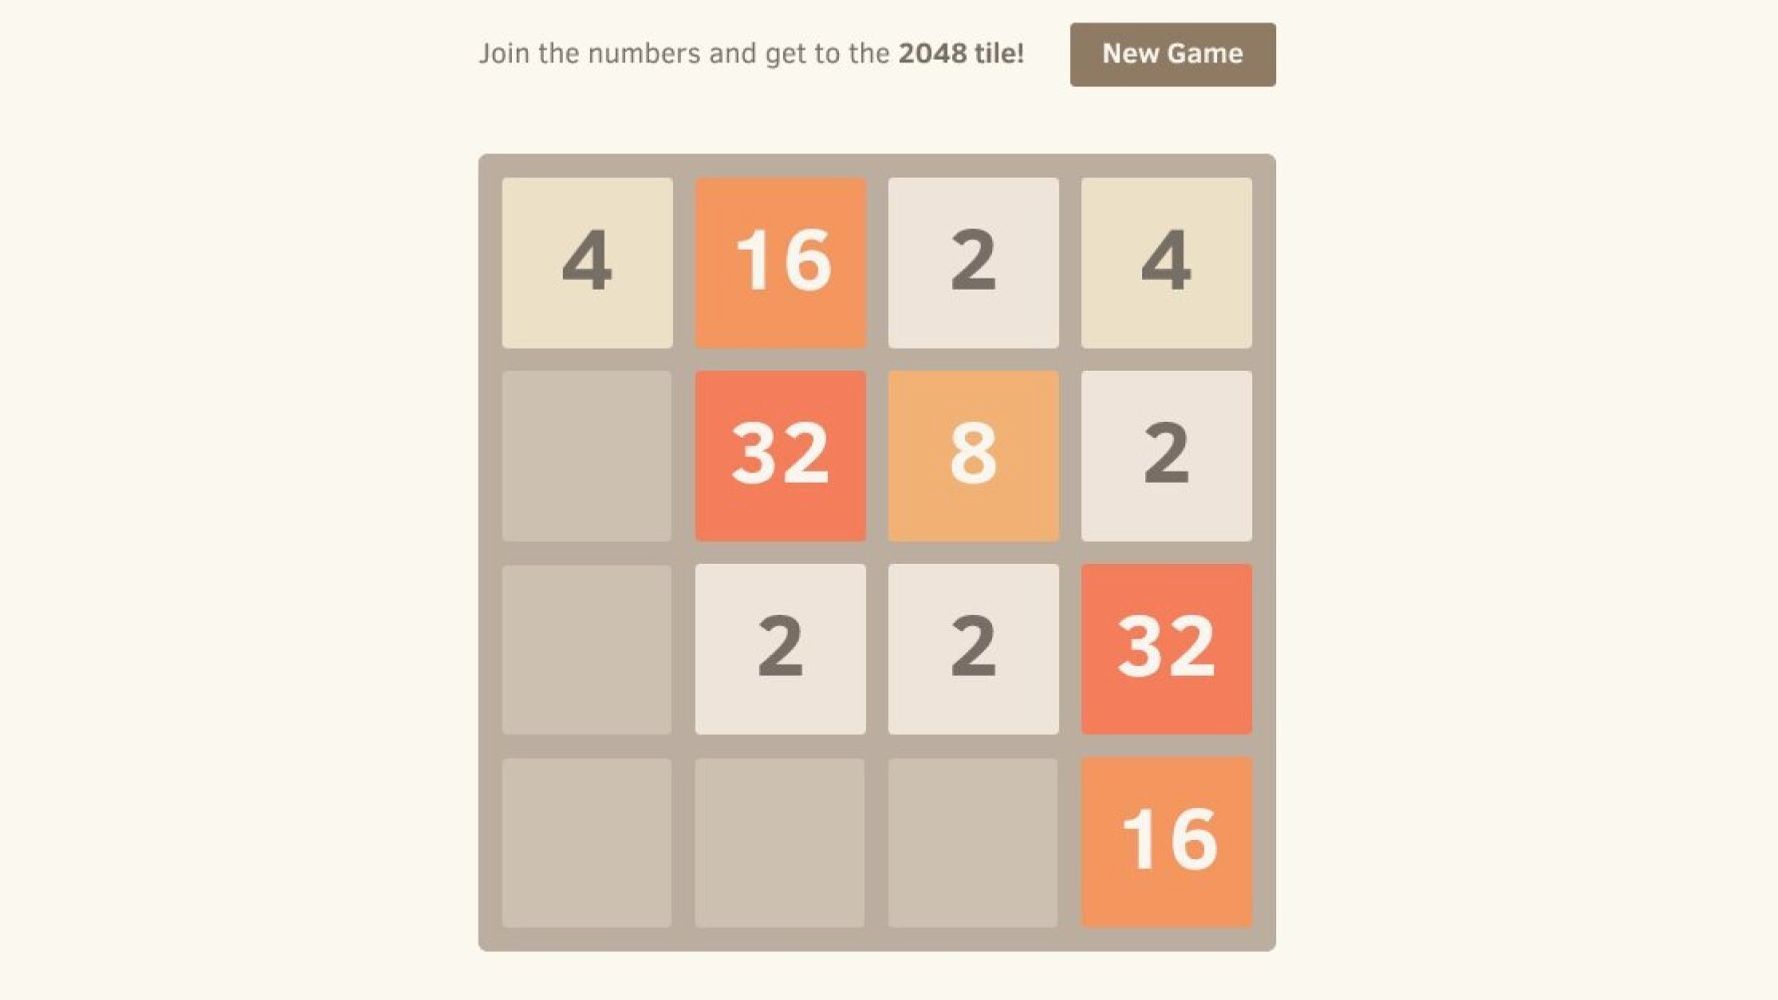 The best 2048 Strategy to get your high score!